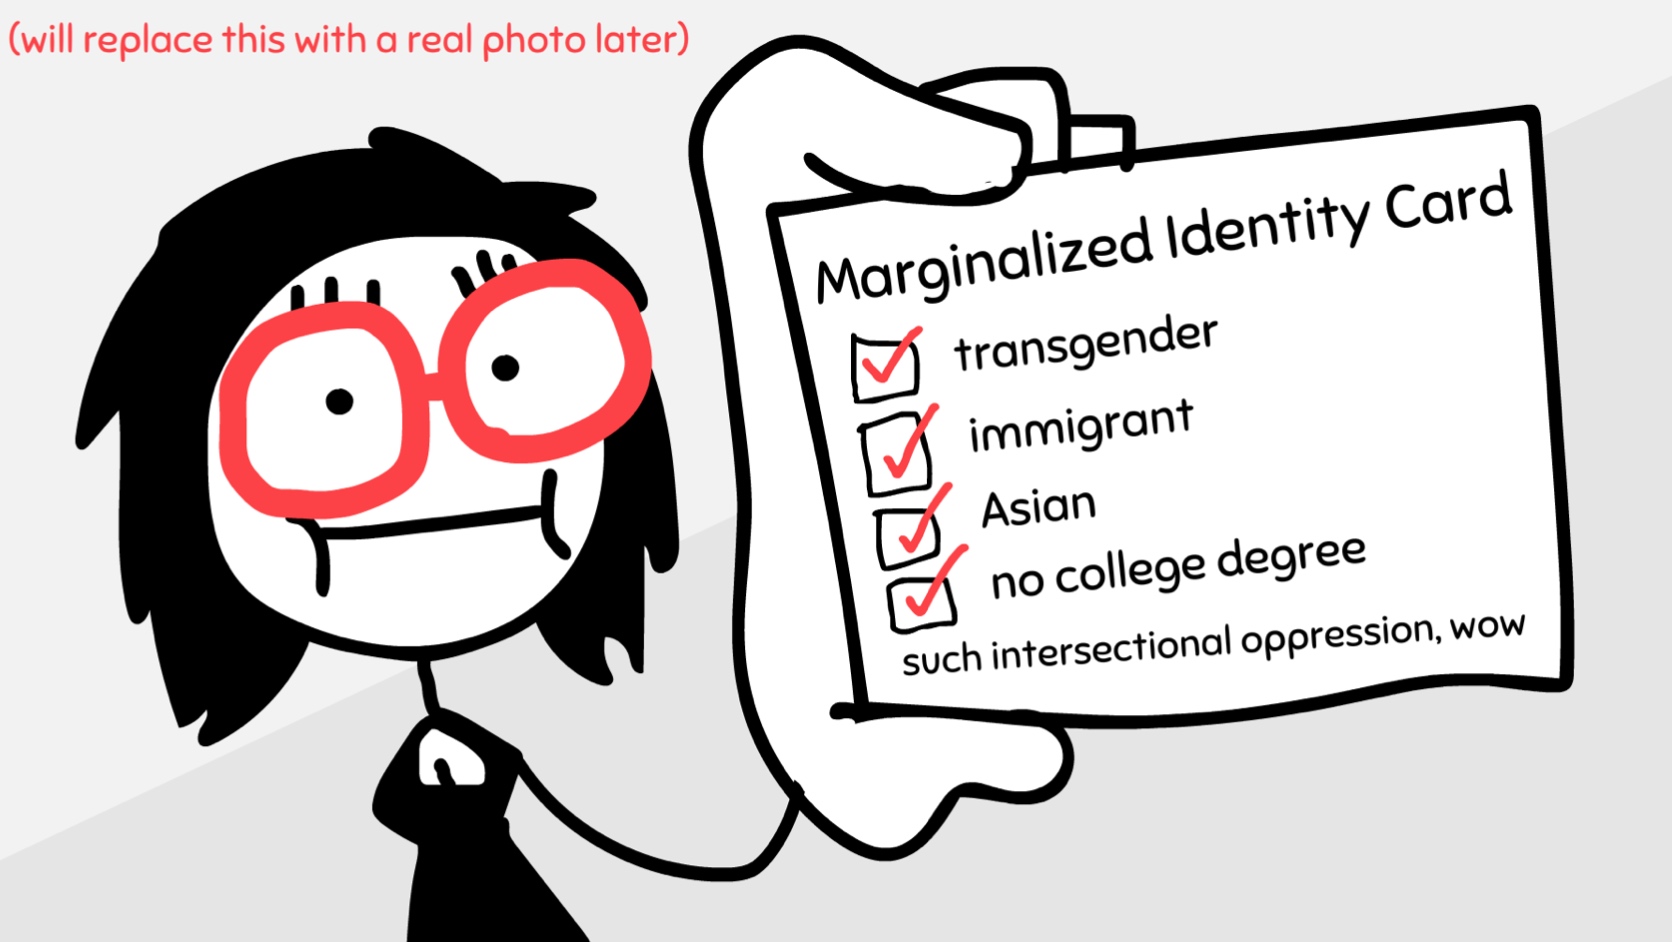 Cartoon drawing of me holding a "Marginalized Identity Card", with checkmarks for "transgender", "immigrant", "Asian", "no college degree". The bottom reads, "such intersectional oppression wow".